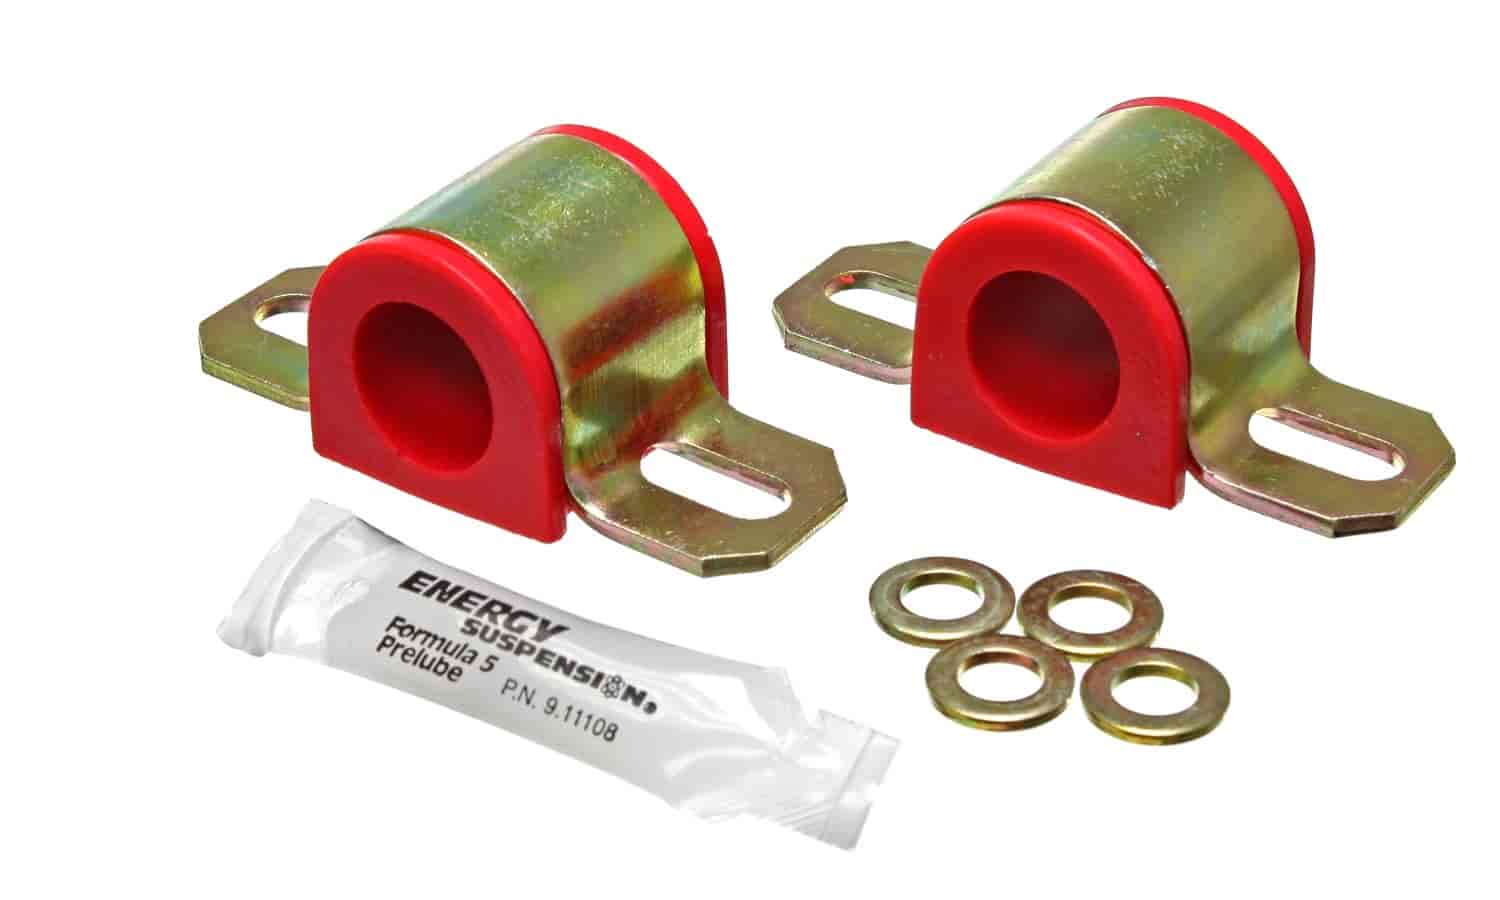 Universal Non-Greaseable Sway Bar Bushings 15/16" or 24mm